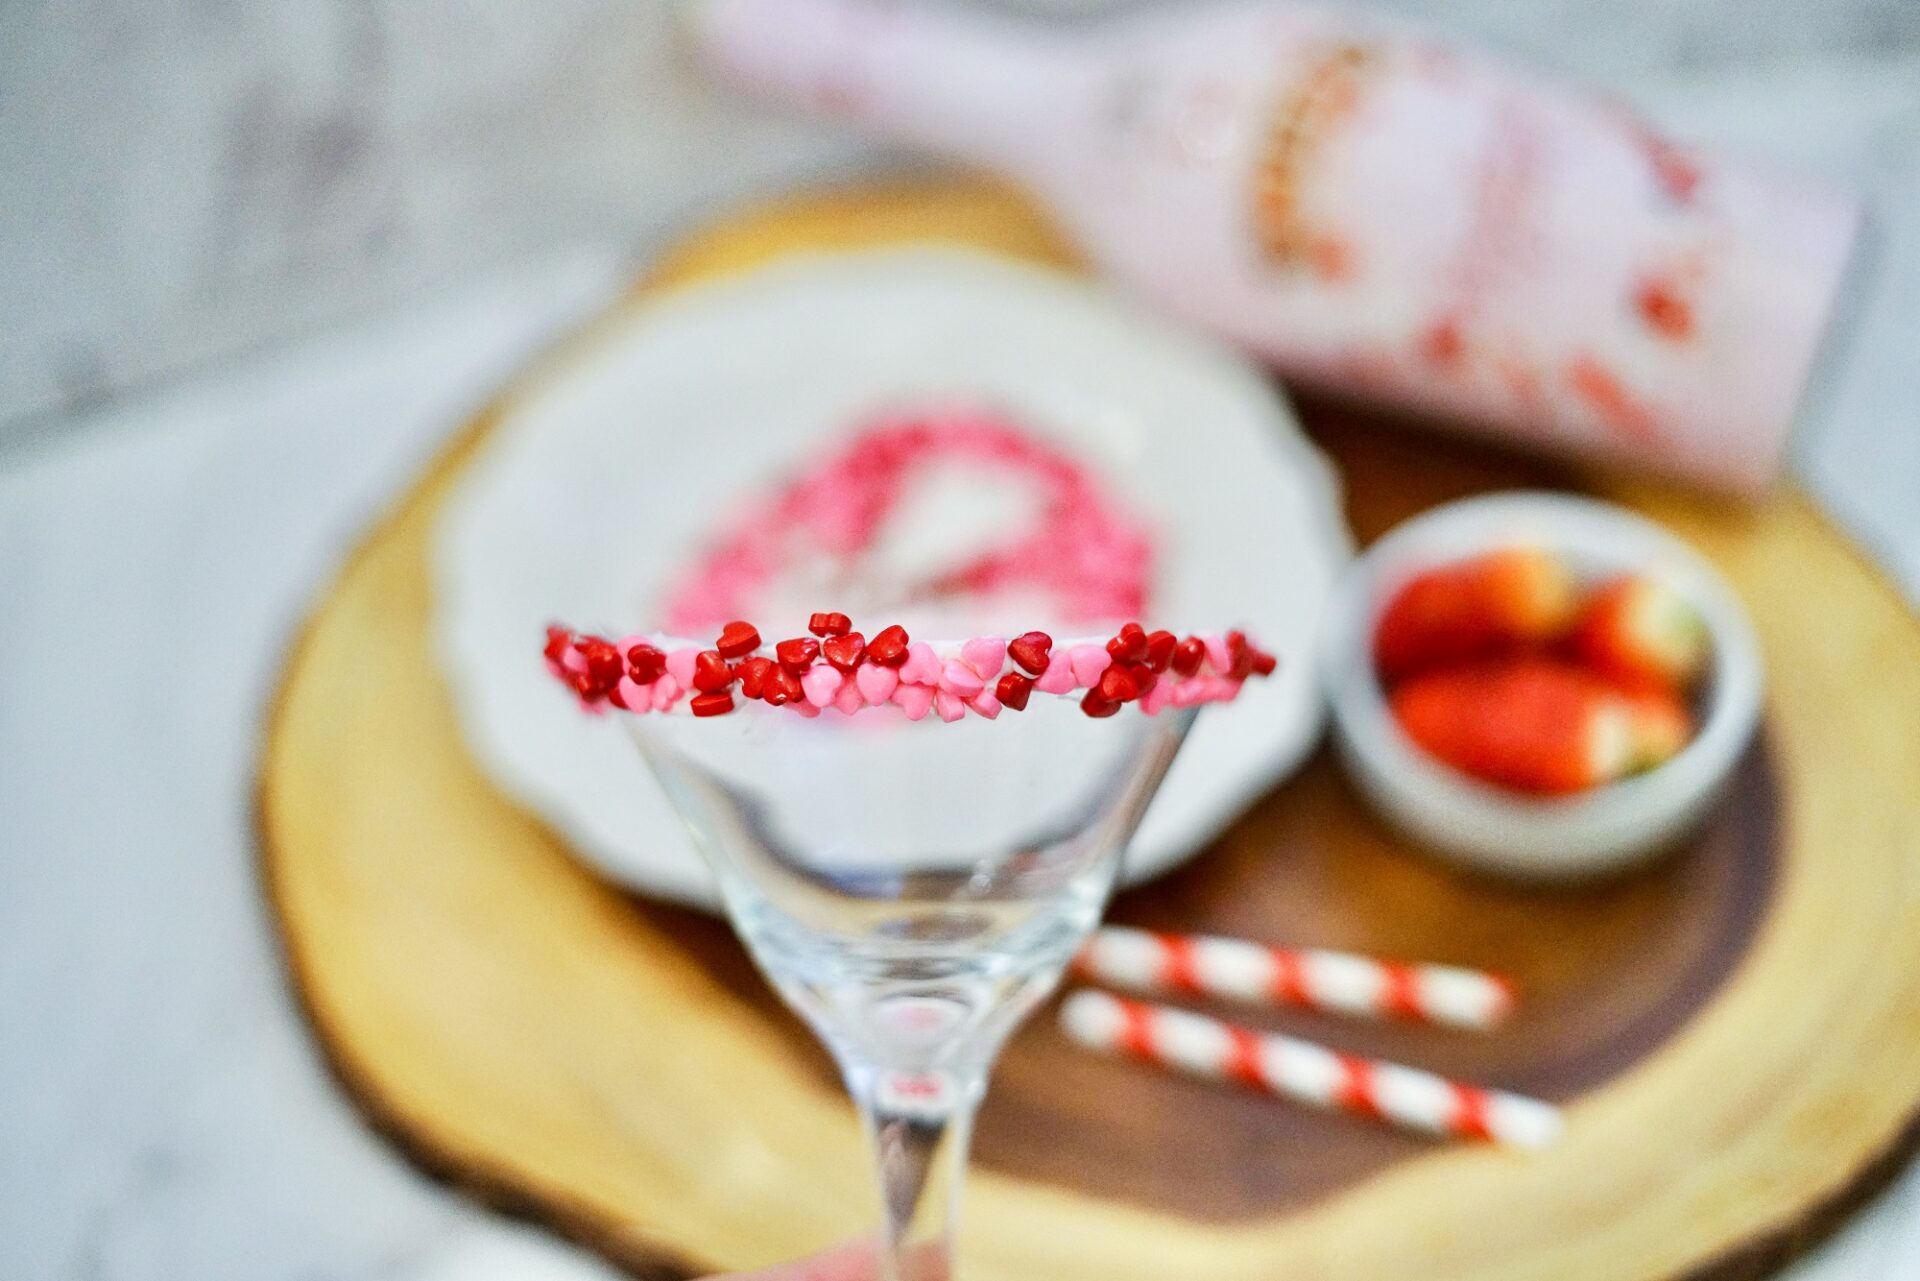 Rimming a martini glass with frosting and heart sprinkles.